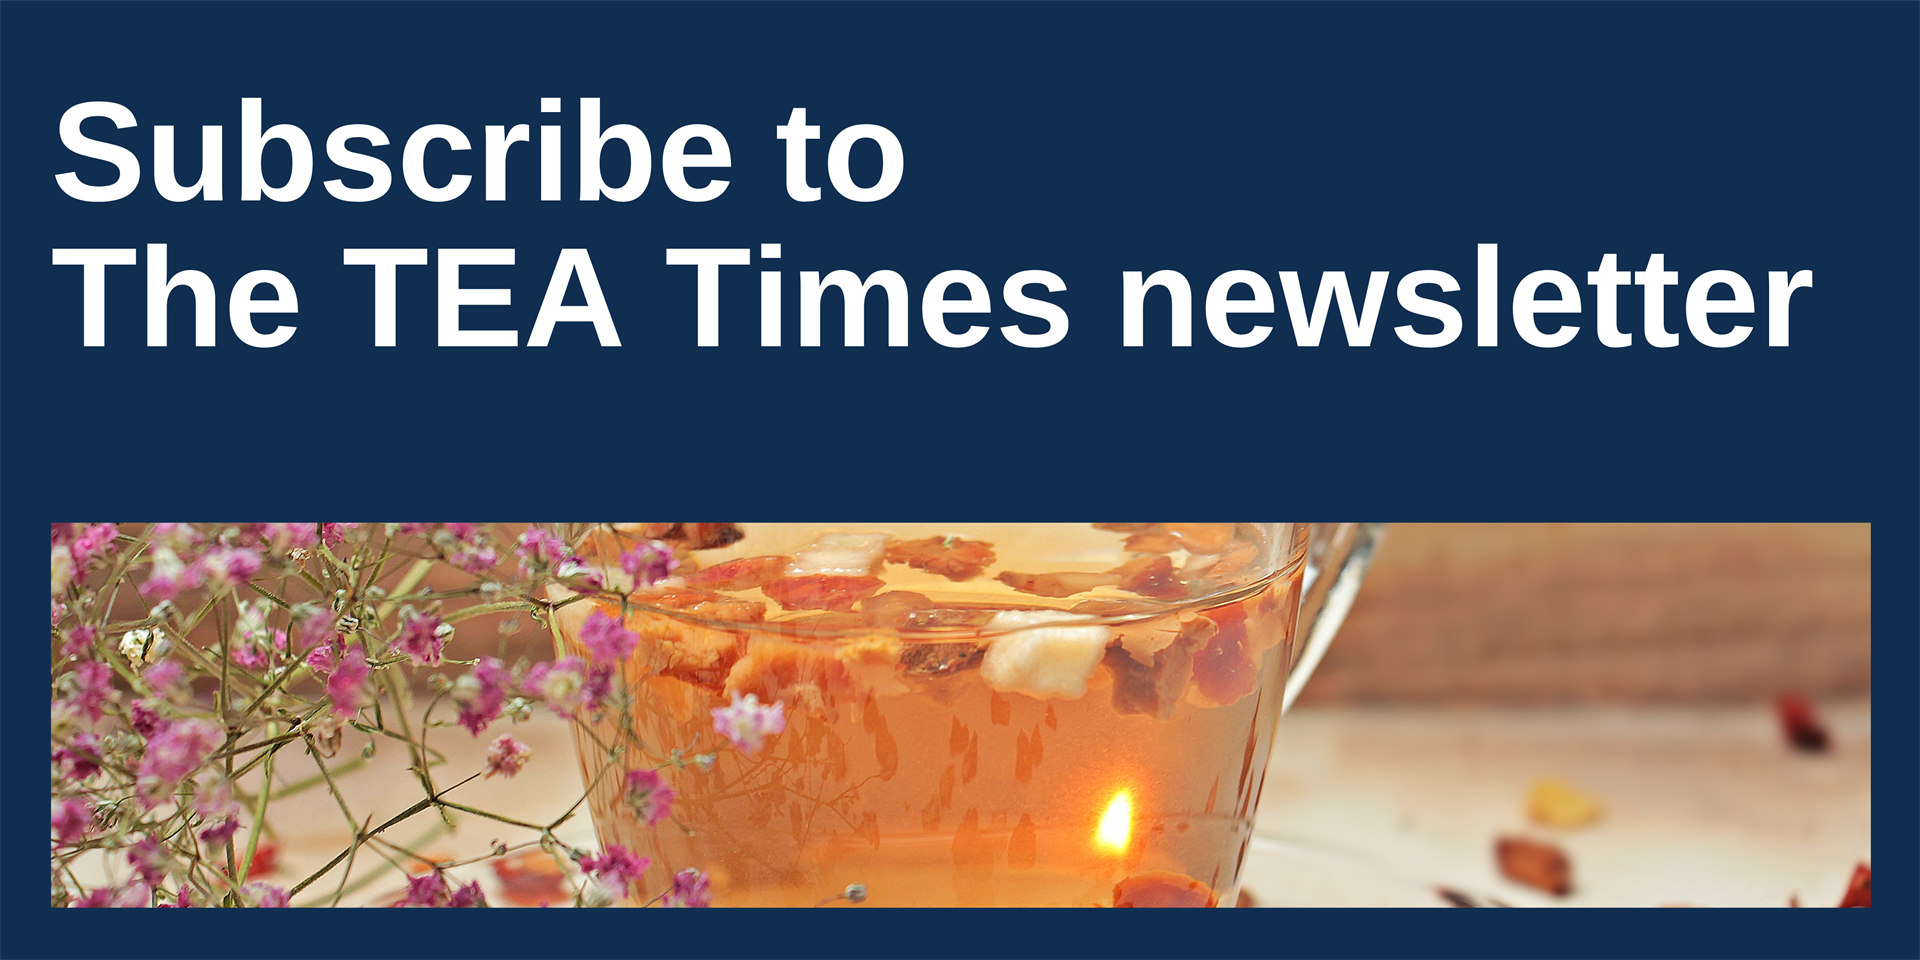 Subscribe to The TEA Times newsletter